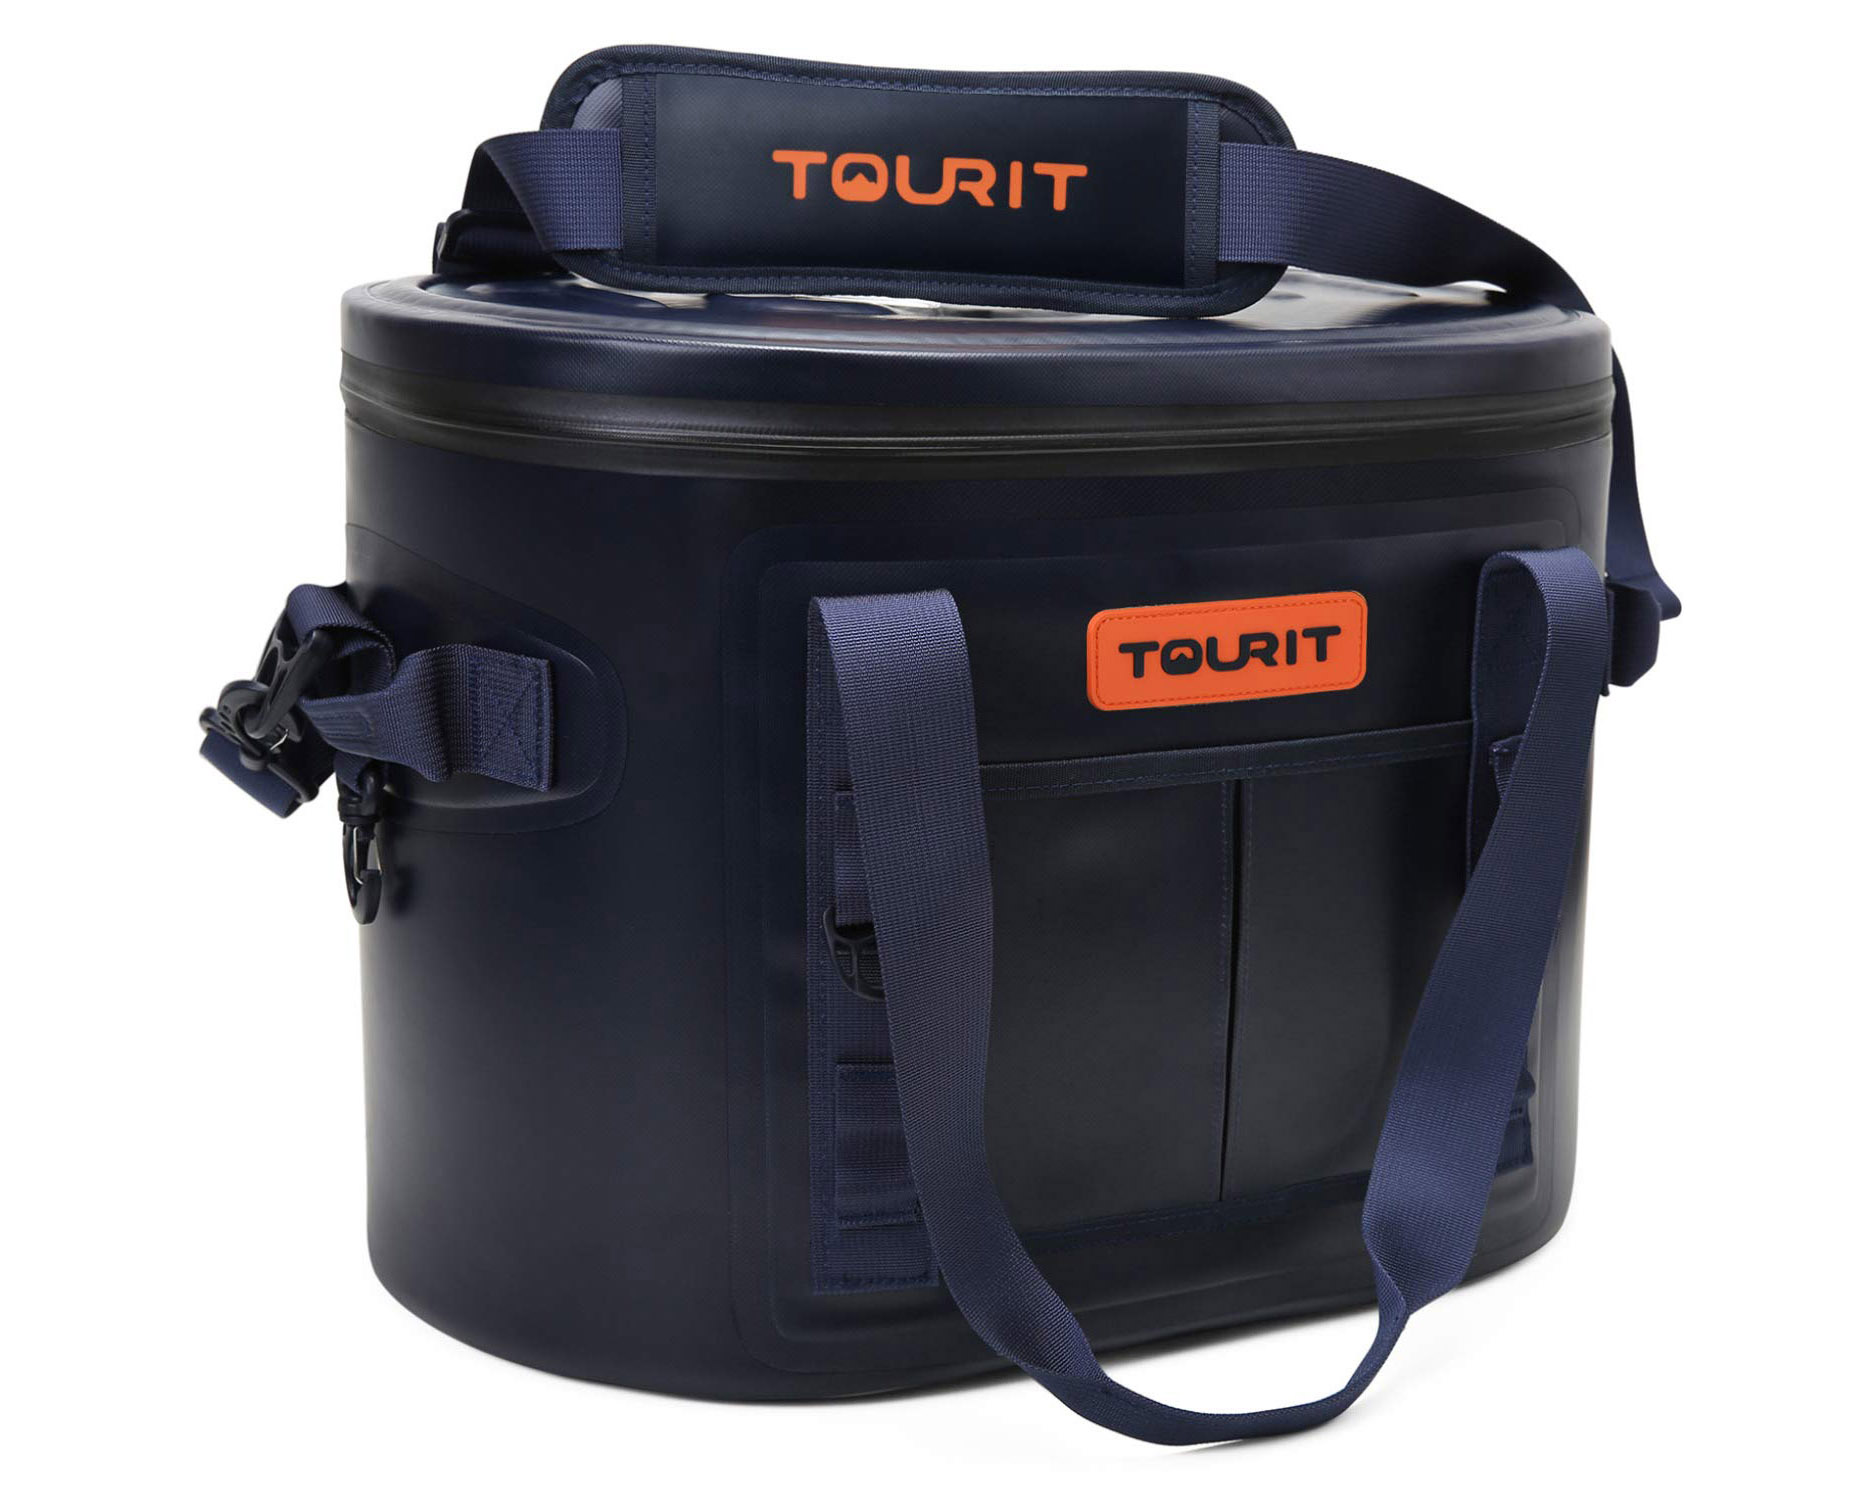 15 Best Coolers For The Money In 2023 That Are Rugged And Dependable